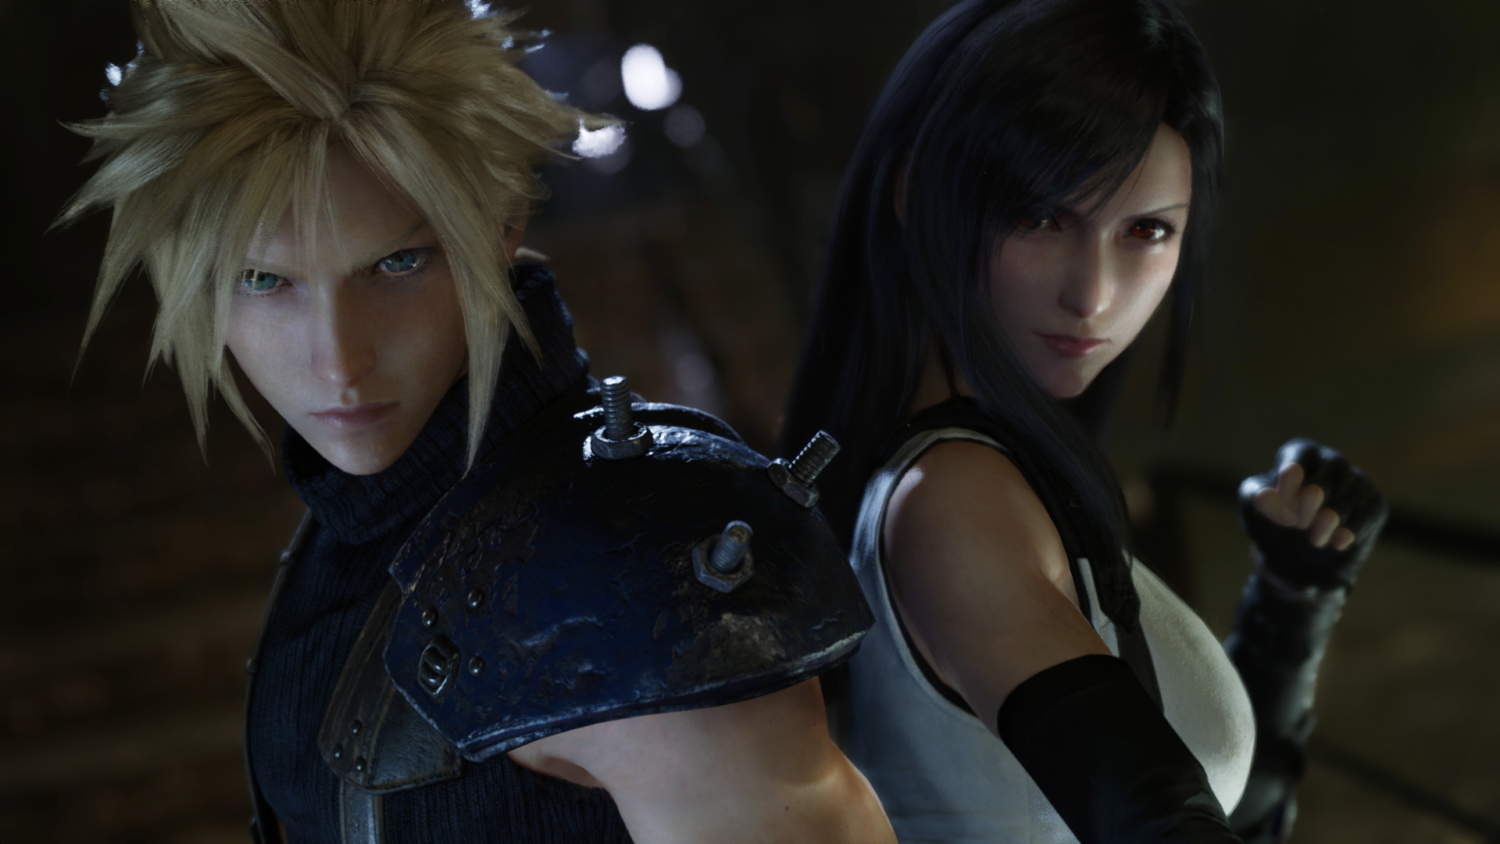 Will FF7 Part 2 Remake Include Pay2Win Elements? - returnal